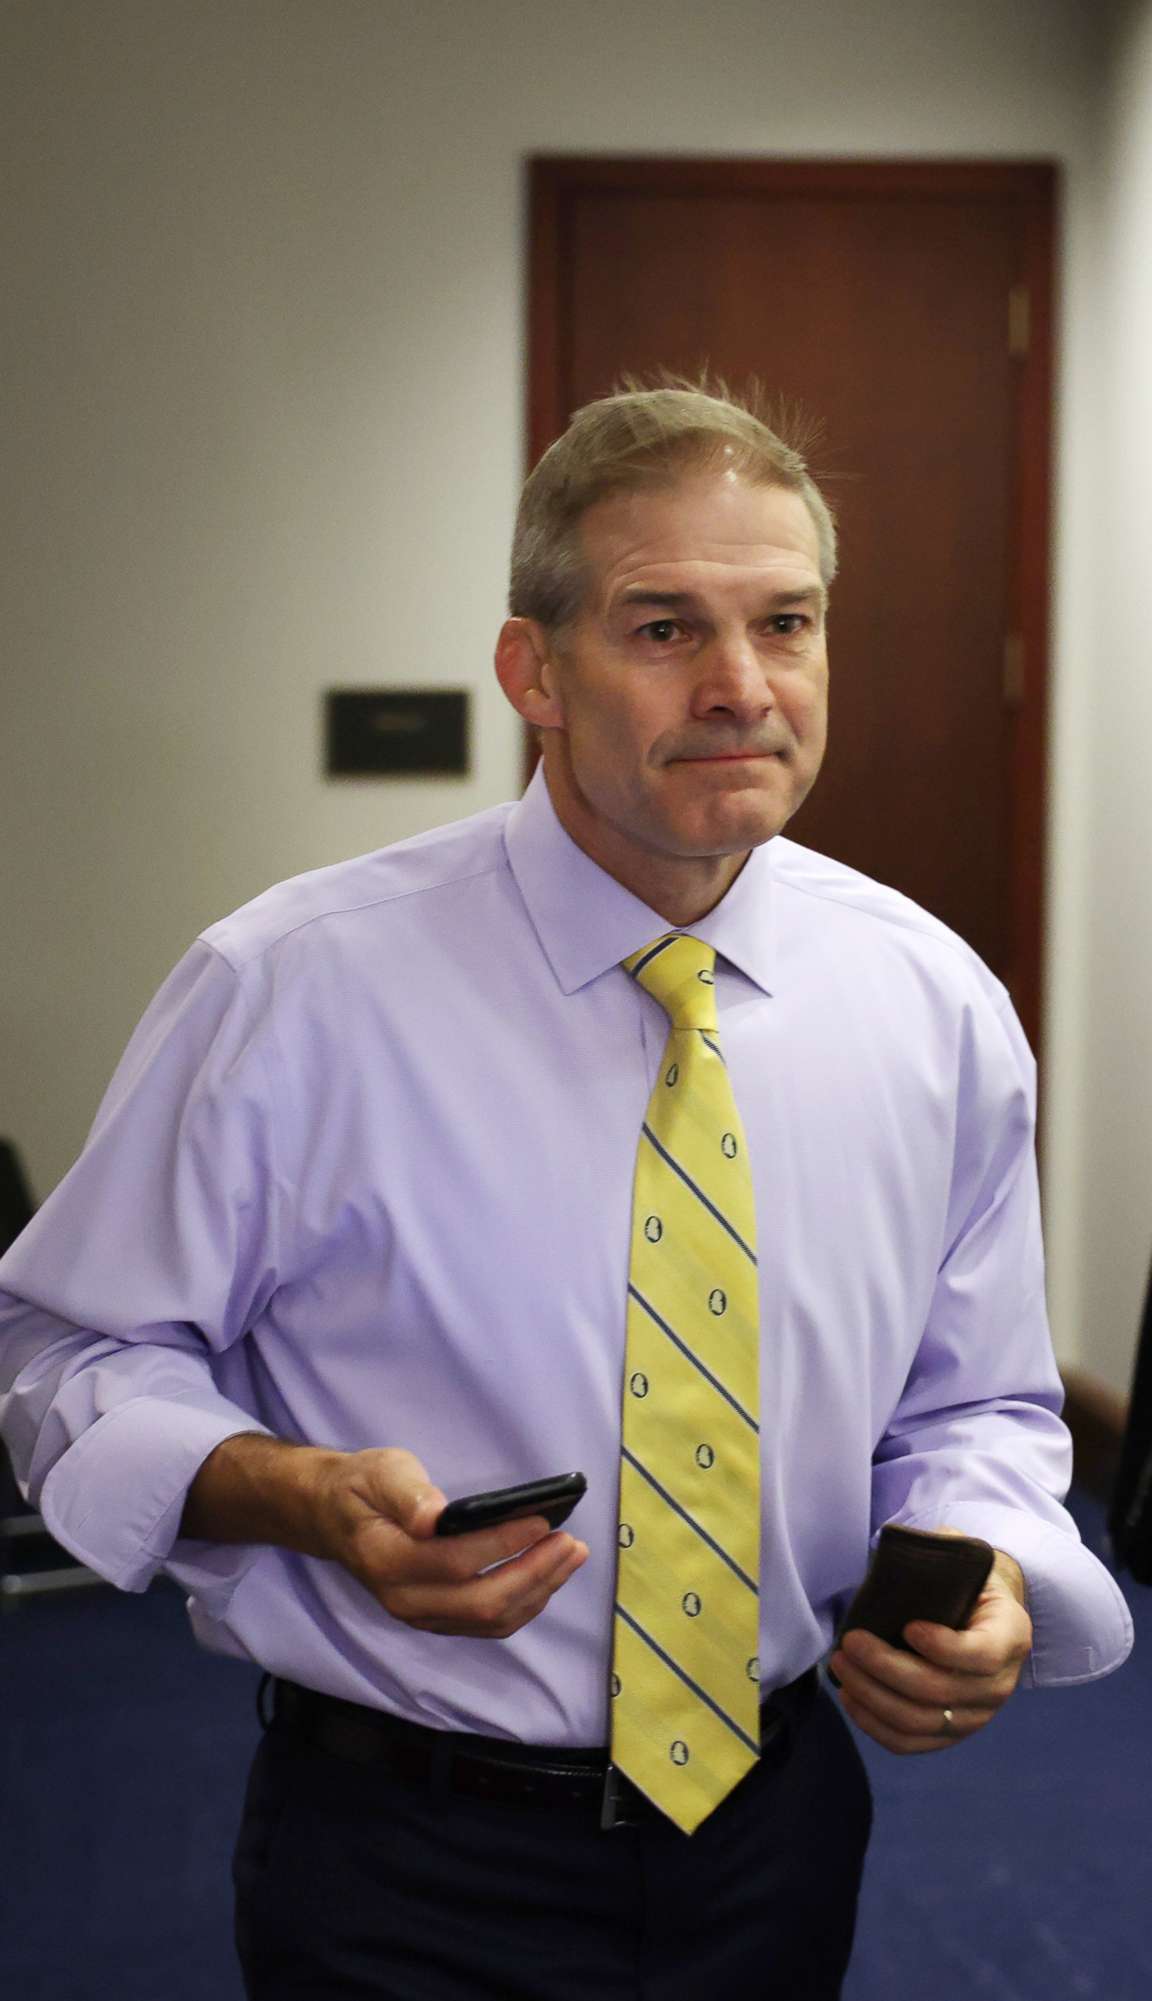 PHOTO: Rep. Jim Jordan departs from a caucus meeting with House Republicans on Capitol Hill on July 20, 2021 in Washington, D.C.